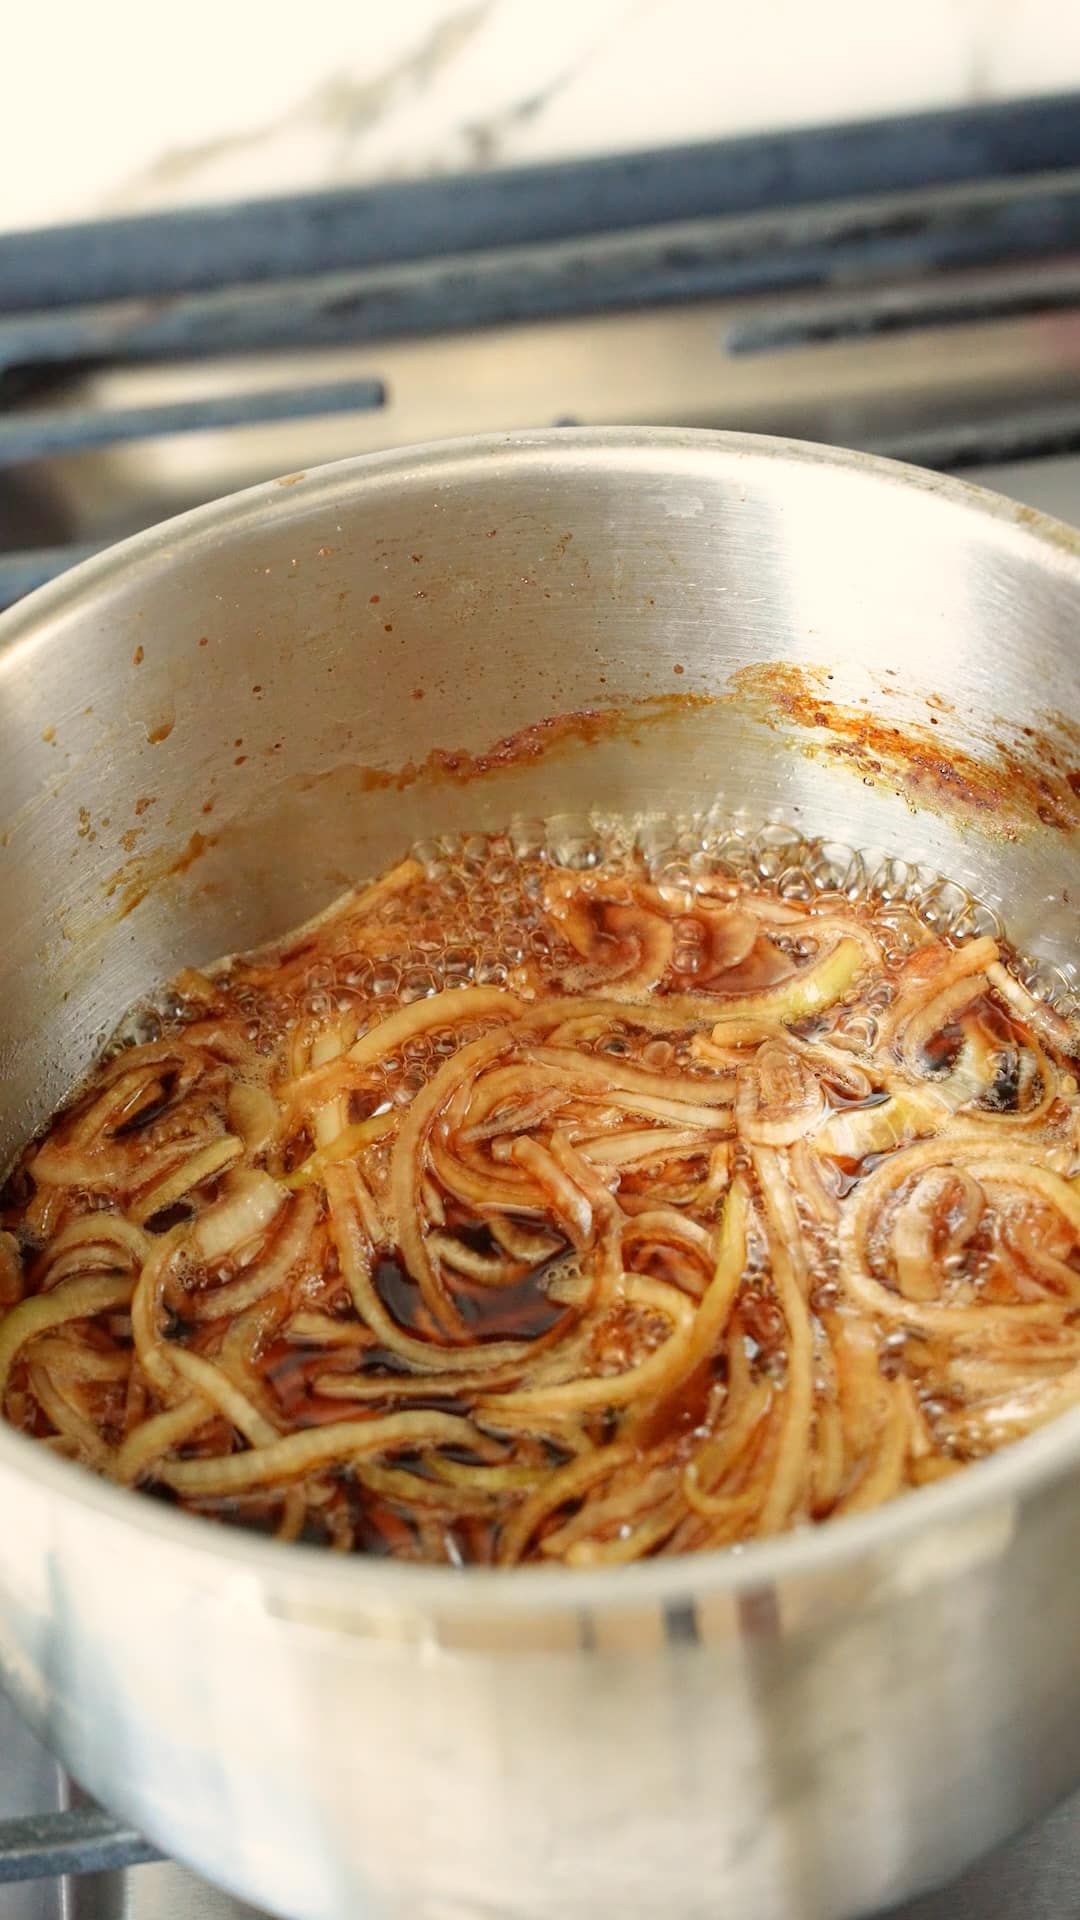 Onions simmering in gyudon sauce.